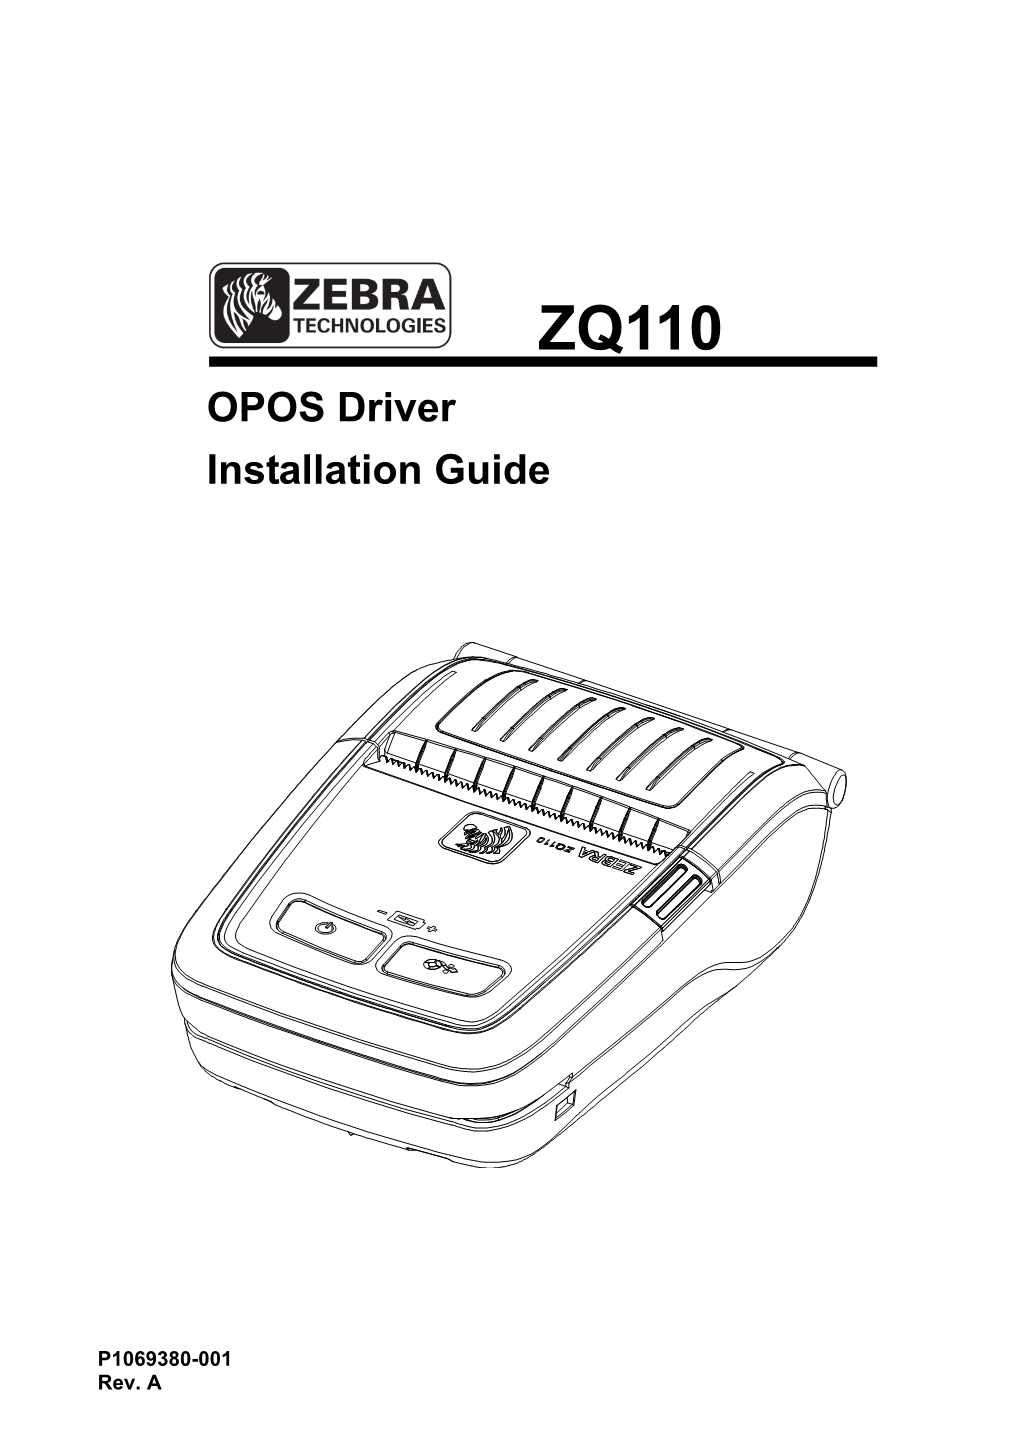 OPOS Driver Installation Guide